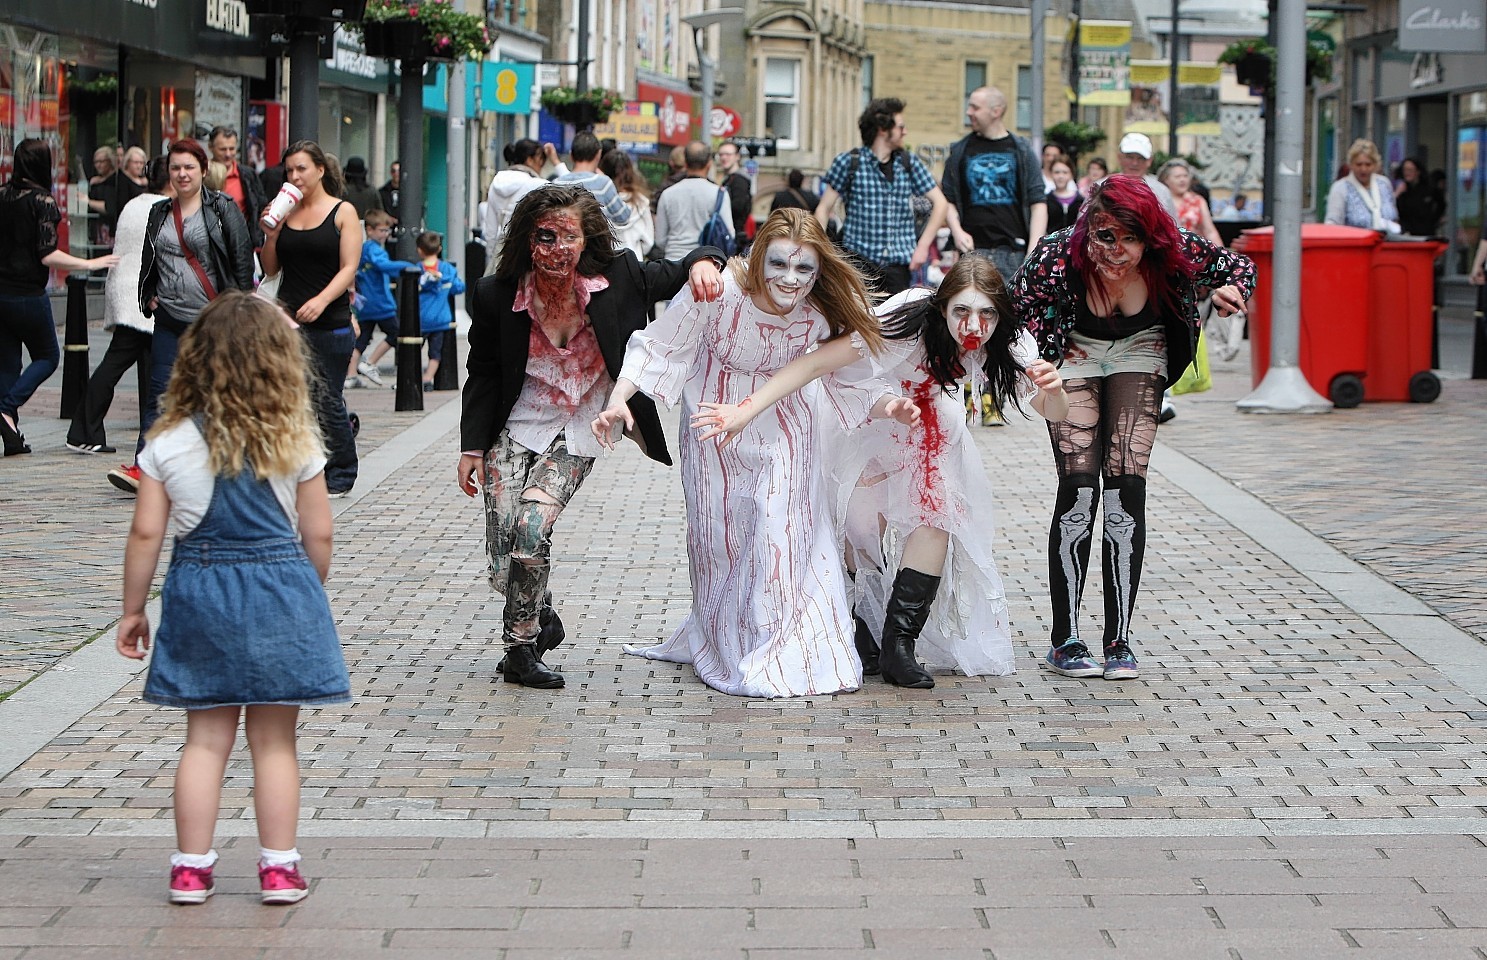 The "dead" roamed Inverness on Saturday 